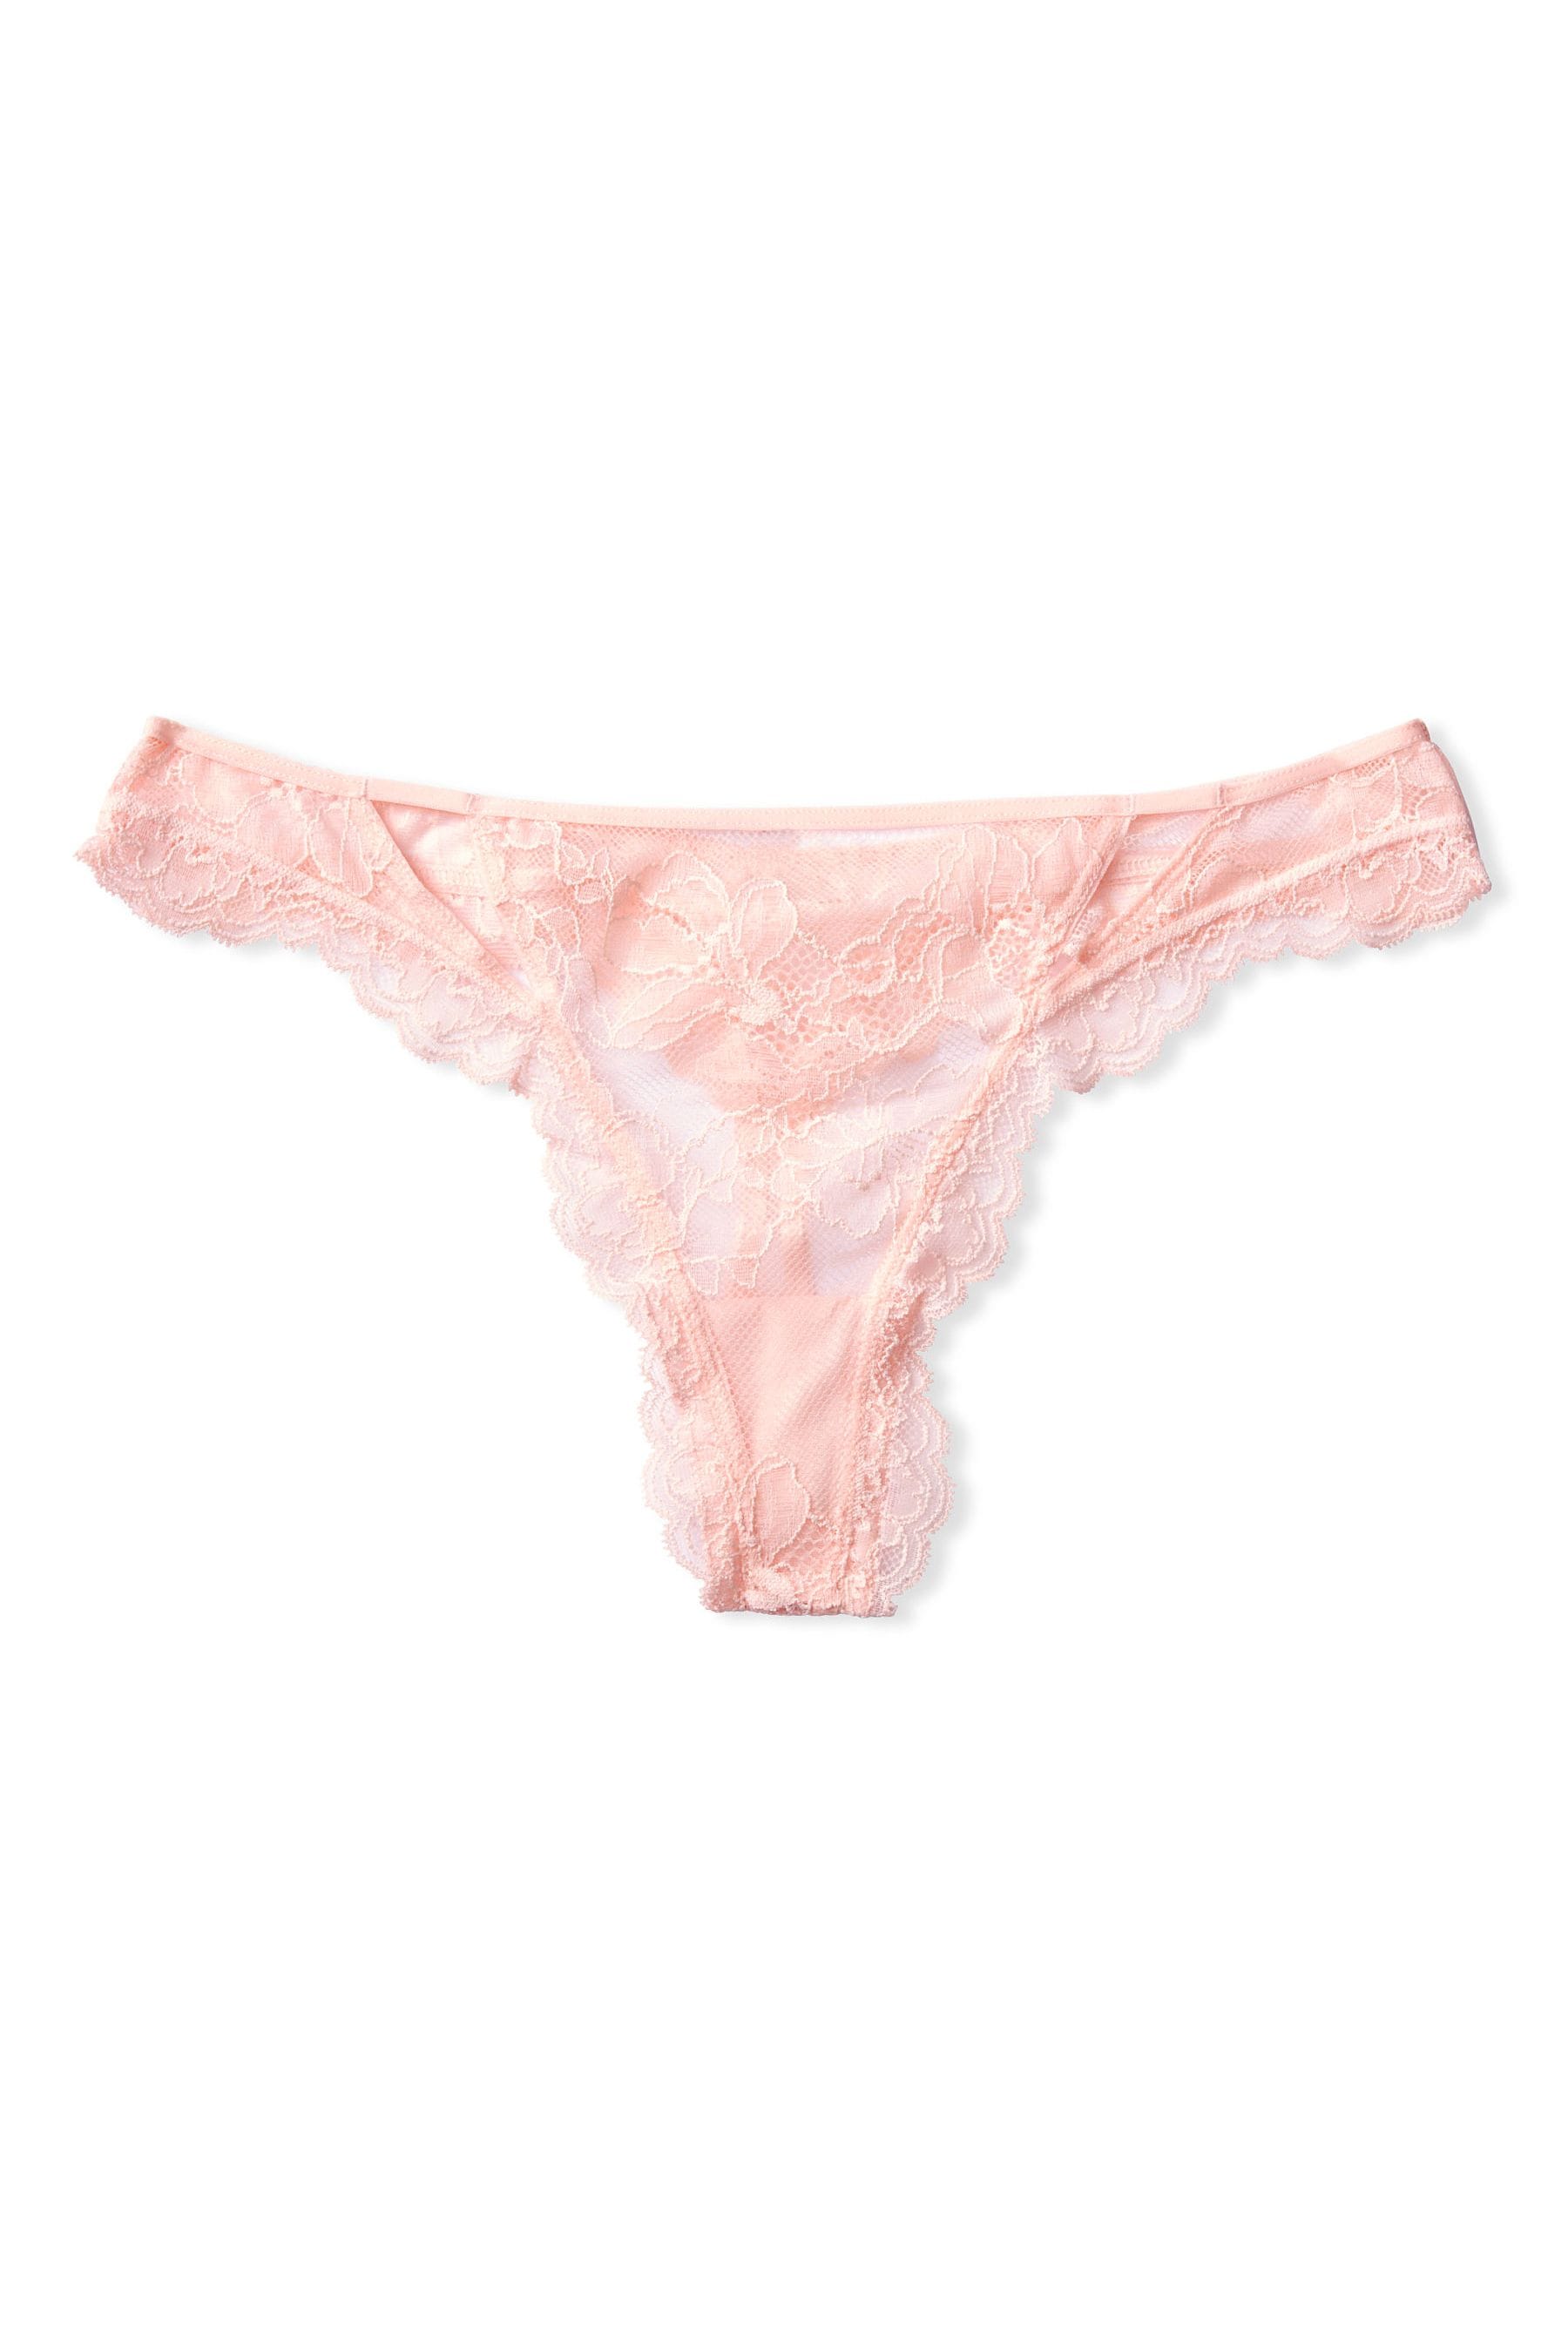 Buy Victoria's Secret Lace Cutout Thong Panty from the Victoria's ...